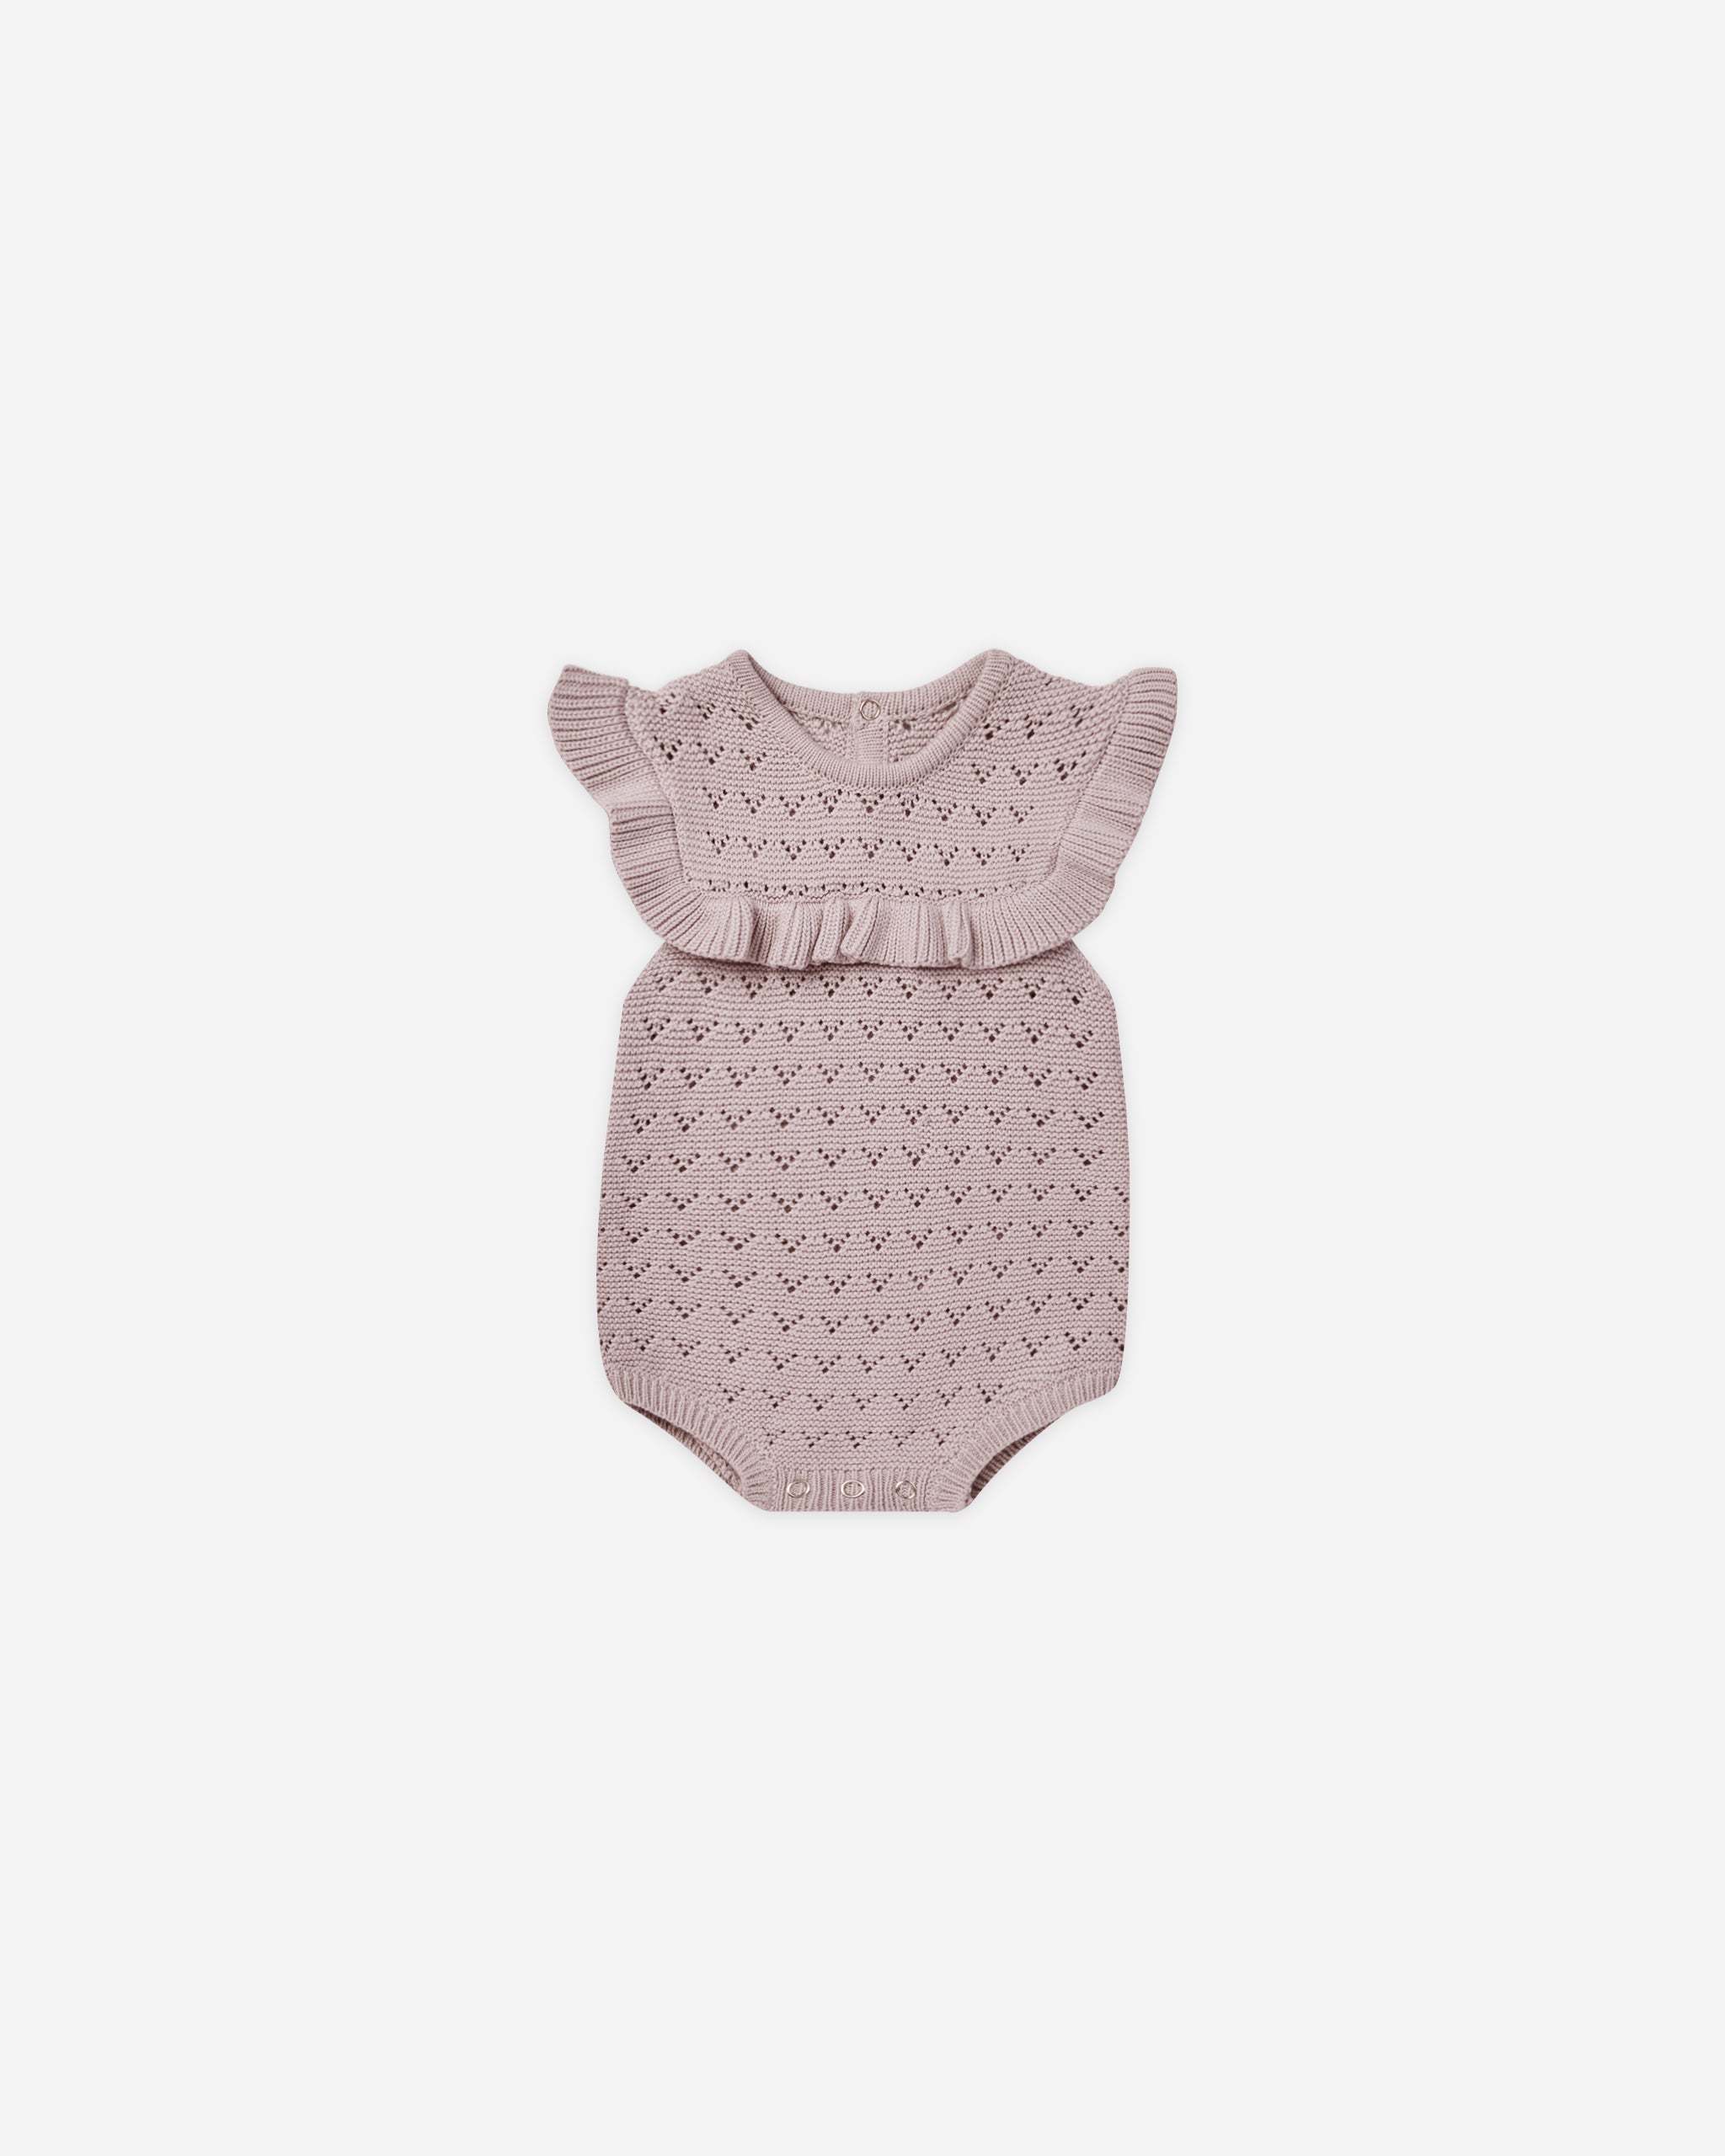 Pointelle Ruffle Romper || Lavender - Rylee + Cru | Kids Clothes | Trendy Baby Clothes | Modern Infant Outfits |